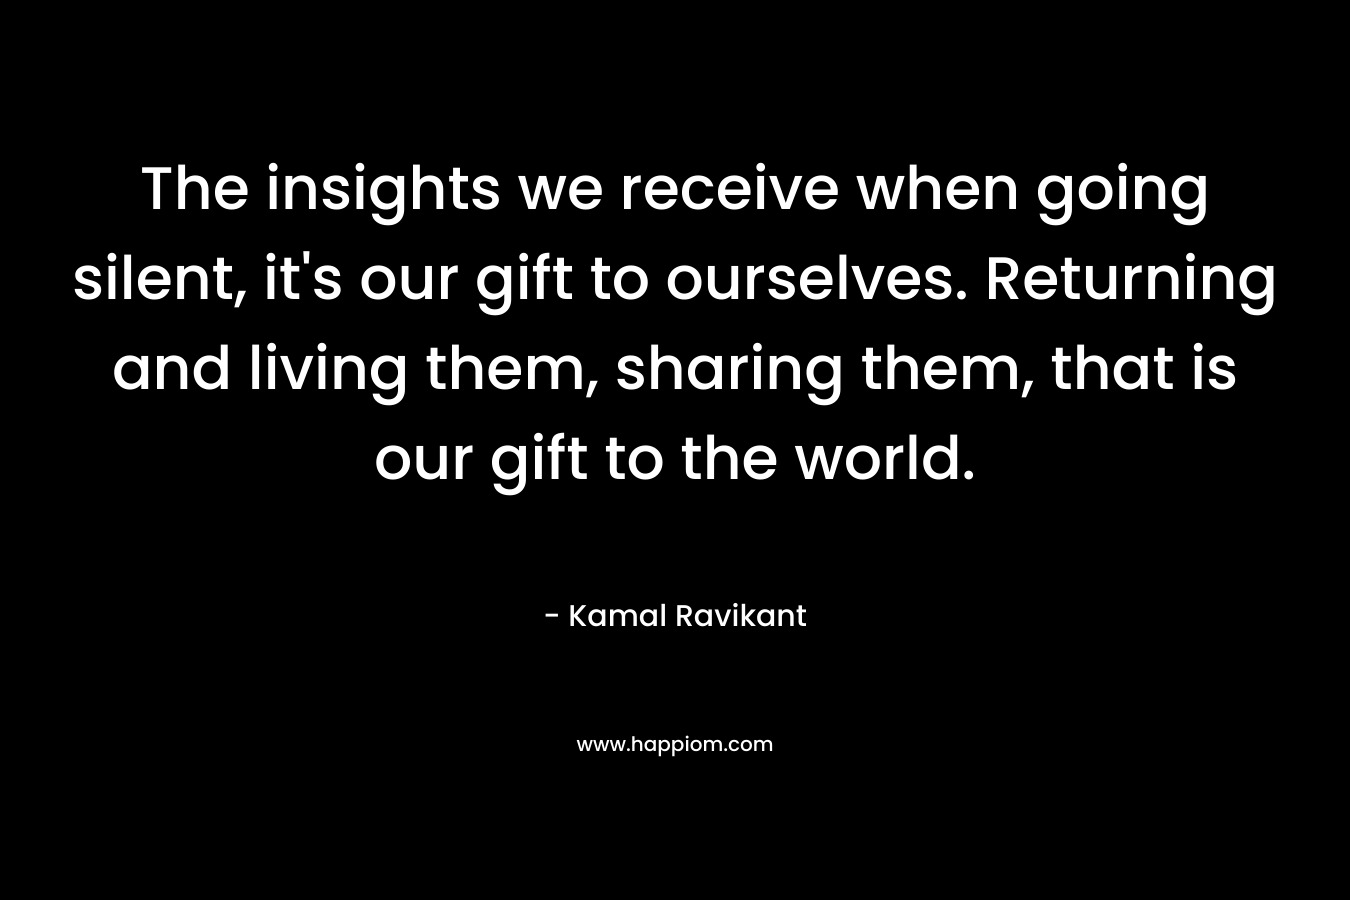 The insights we receive when going silent, it's our gift to ourselves. Returning and living them, sharing them, that is our gift to the world.